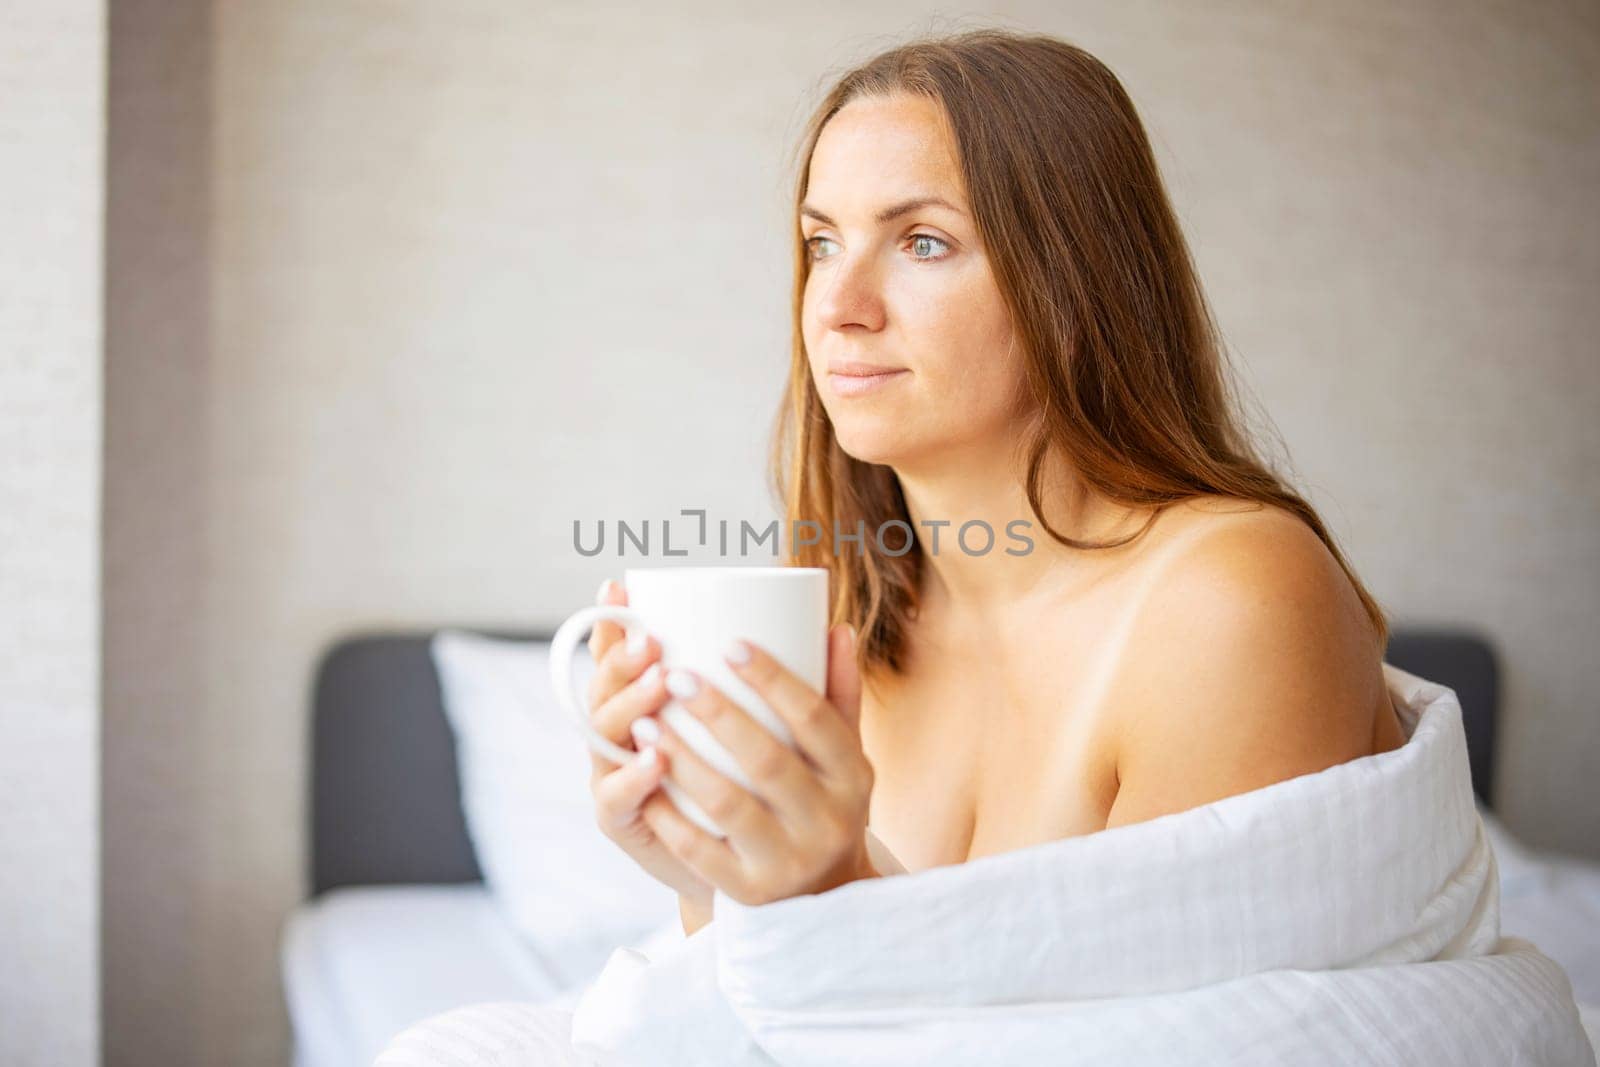 Beautiful young woman drinking a cup of coffee or tea while sitting on the bed after waking up in the morning. A woman is enjoying her drink in bed at home.